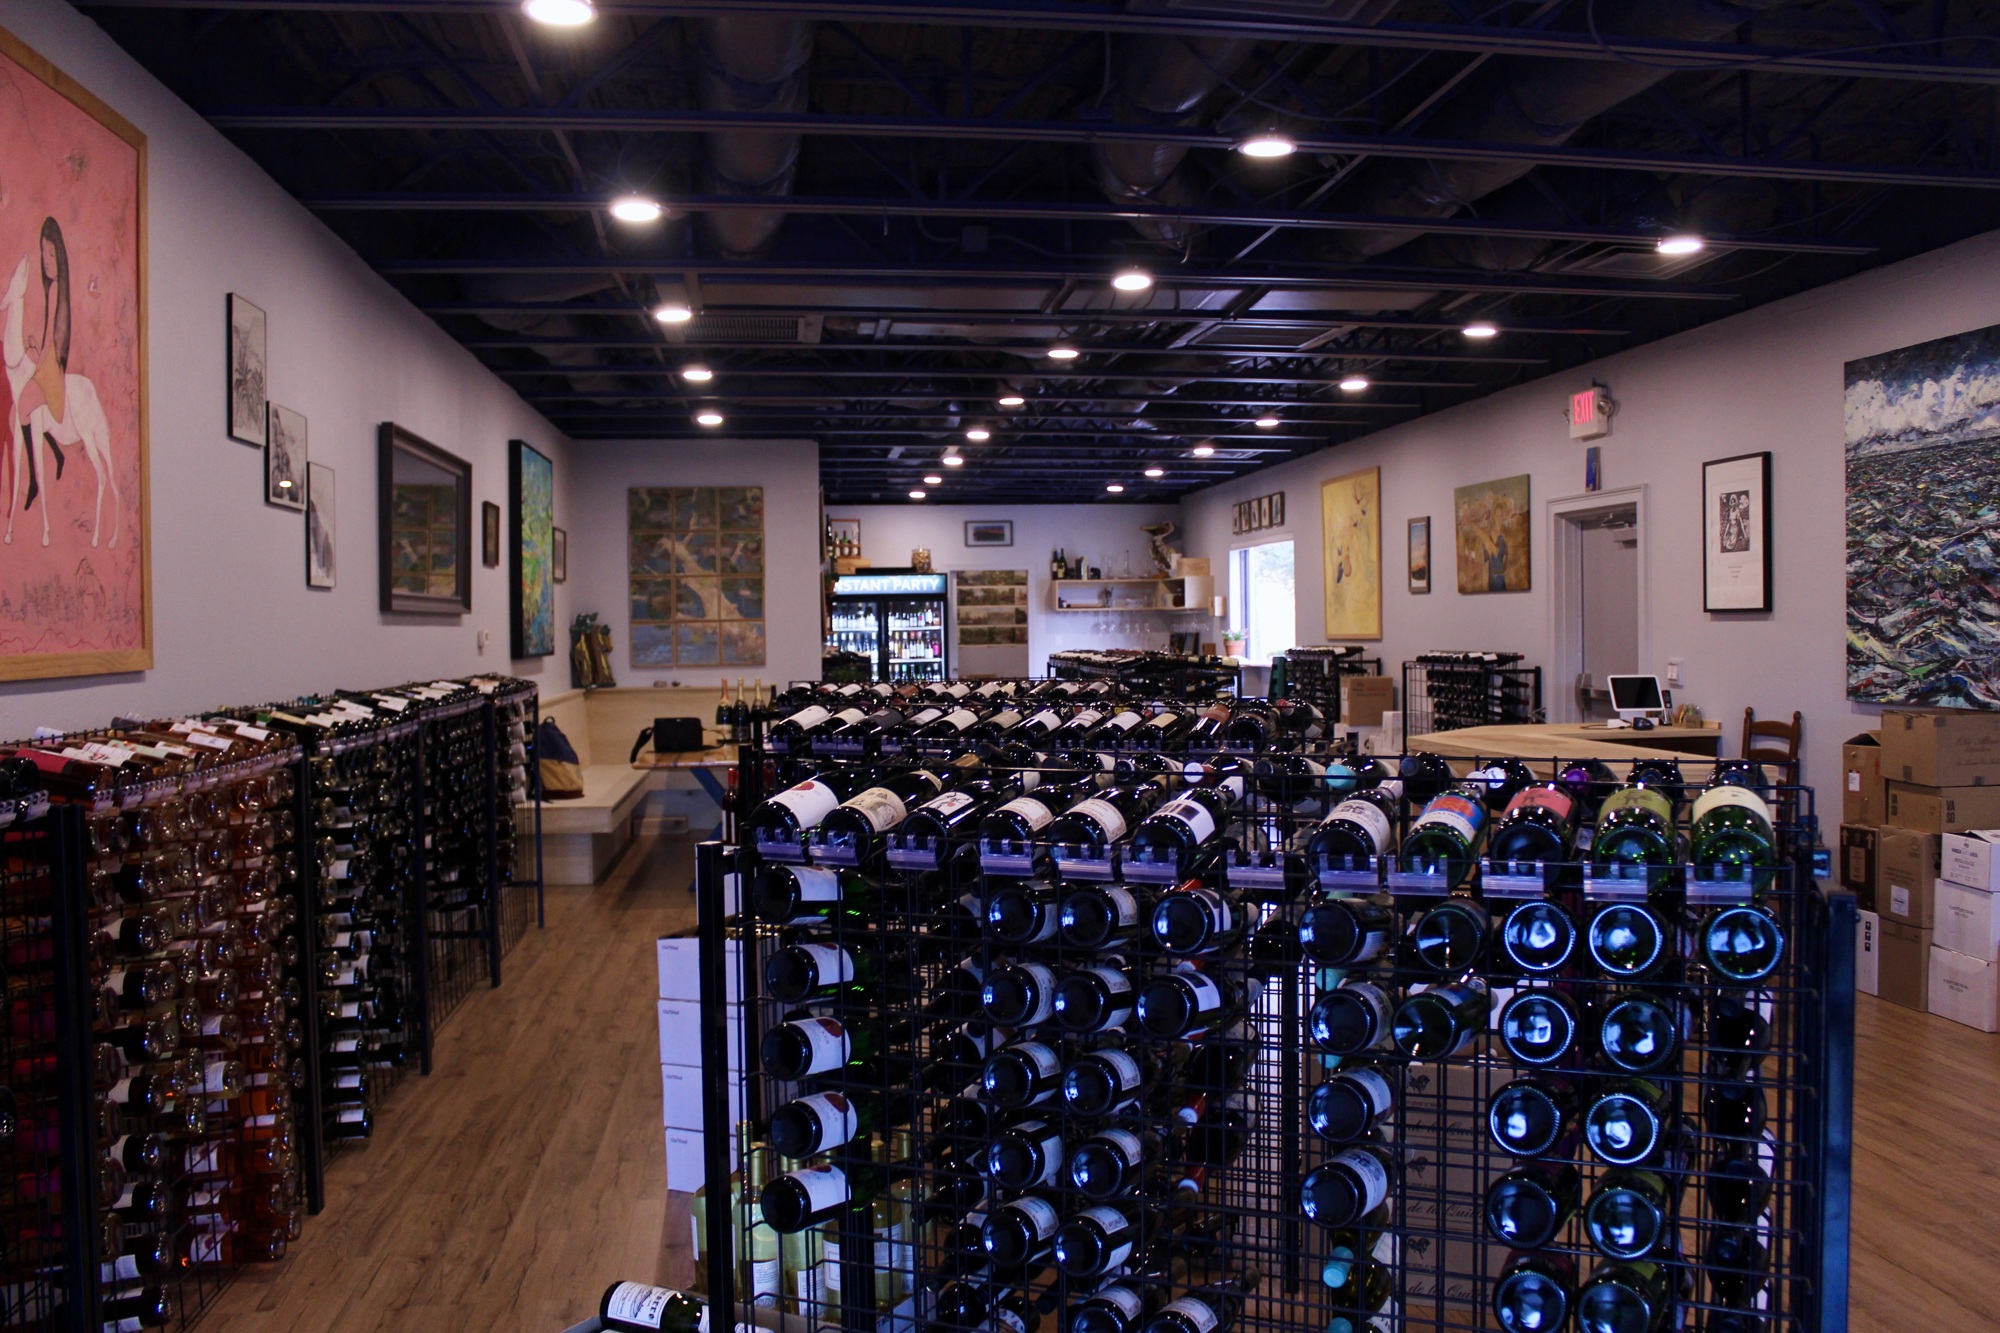 Courtesy, Clyde Morgan. Seagrape Wine Co. Owner Thomas Morgan opened his independent wine shop in Sarasota in December 2018.